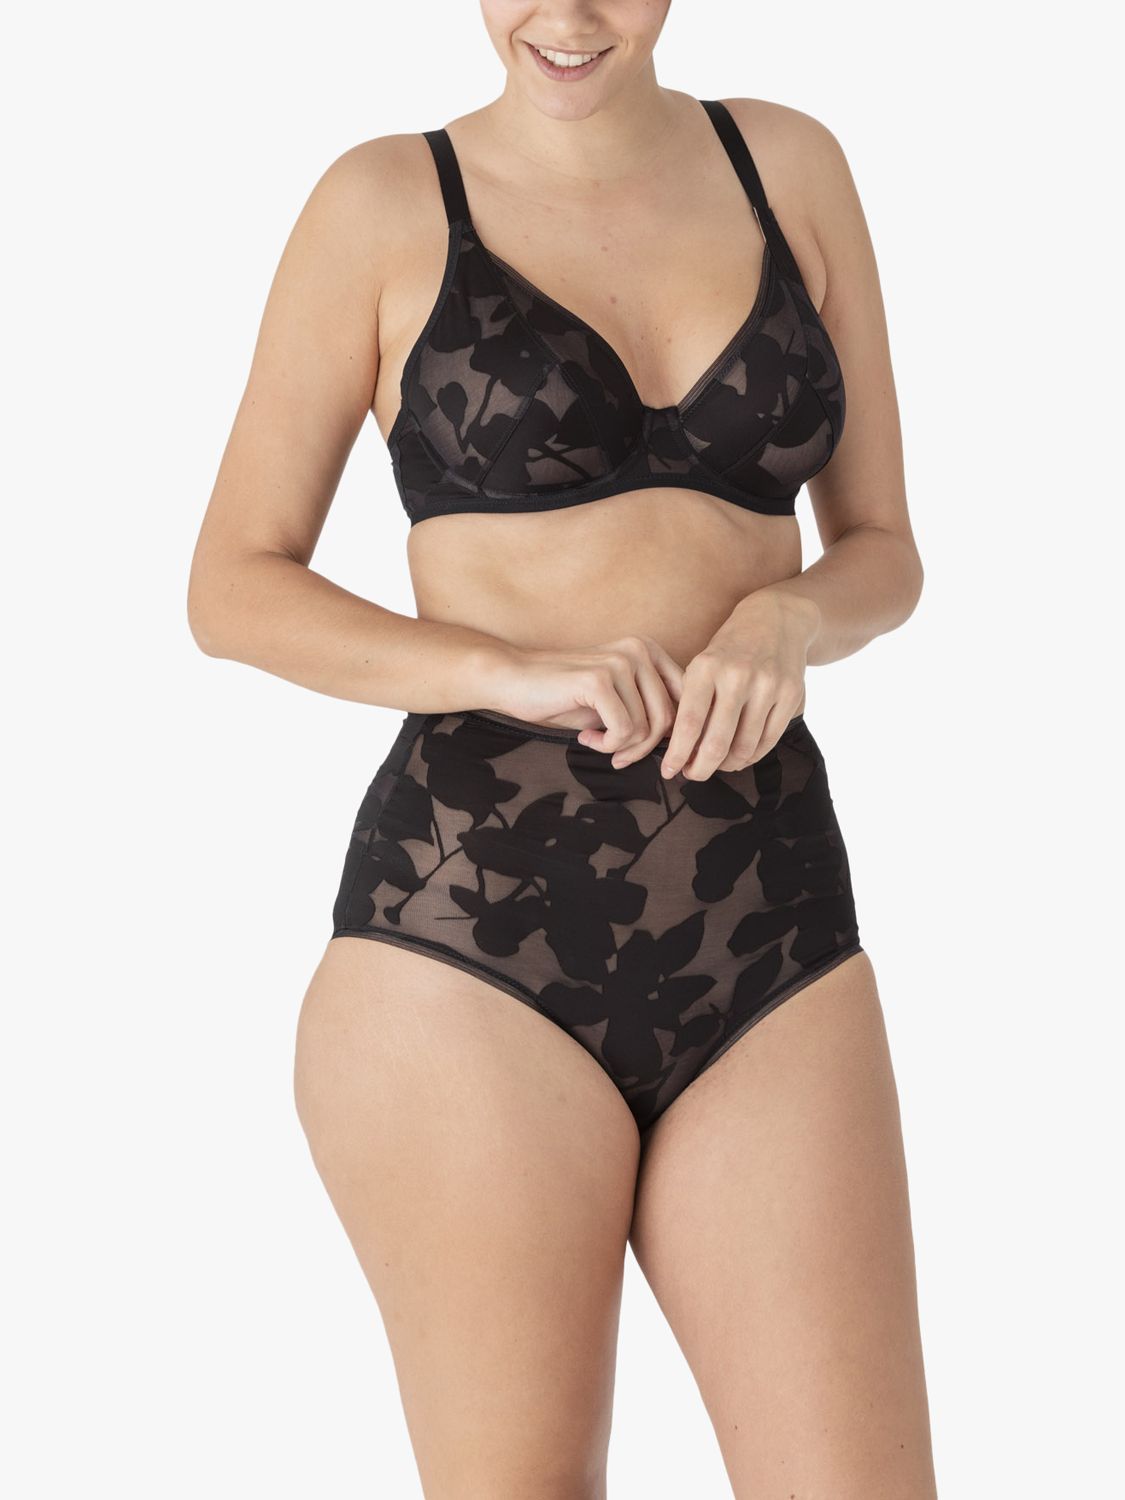 Maison Lejaby Ombrage High Waisted Knickers